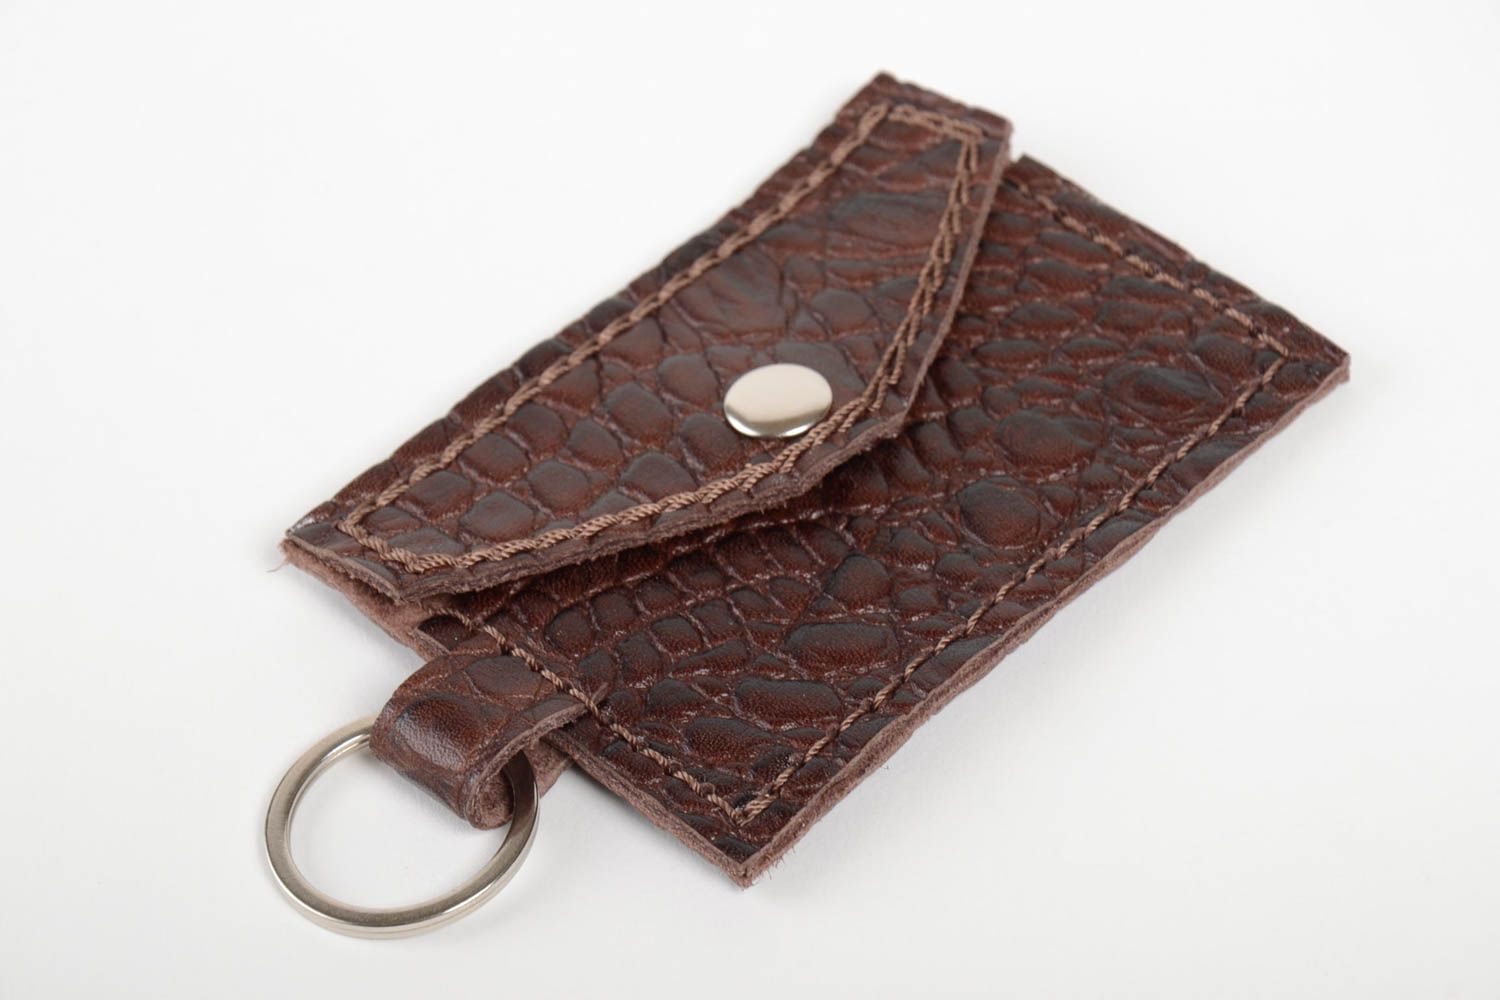 Handmade leather wallet leather key case leather goods presents for men photo 2